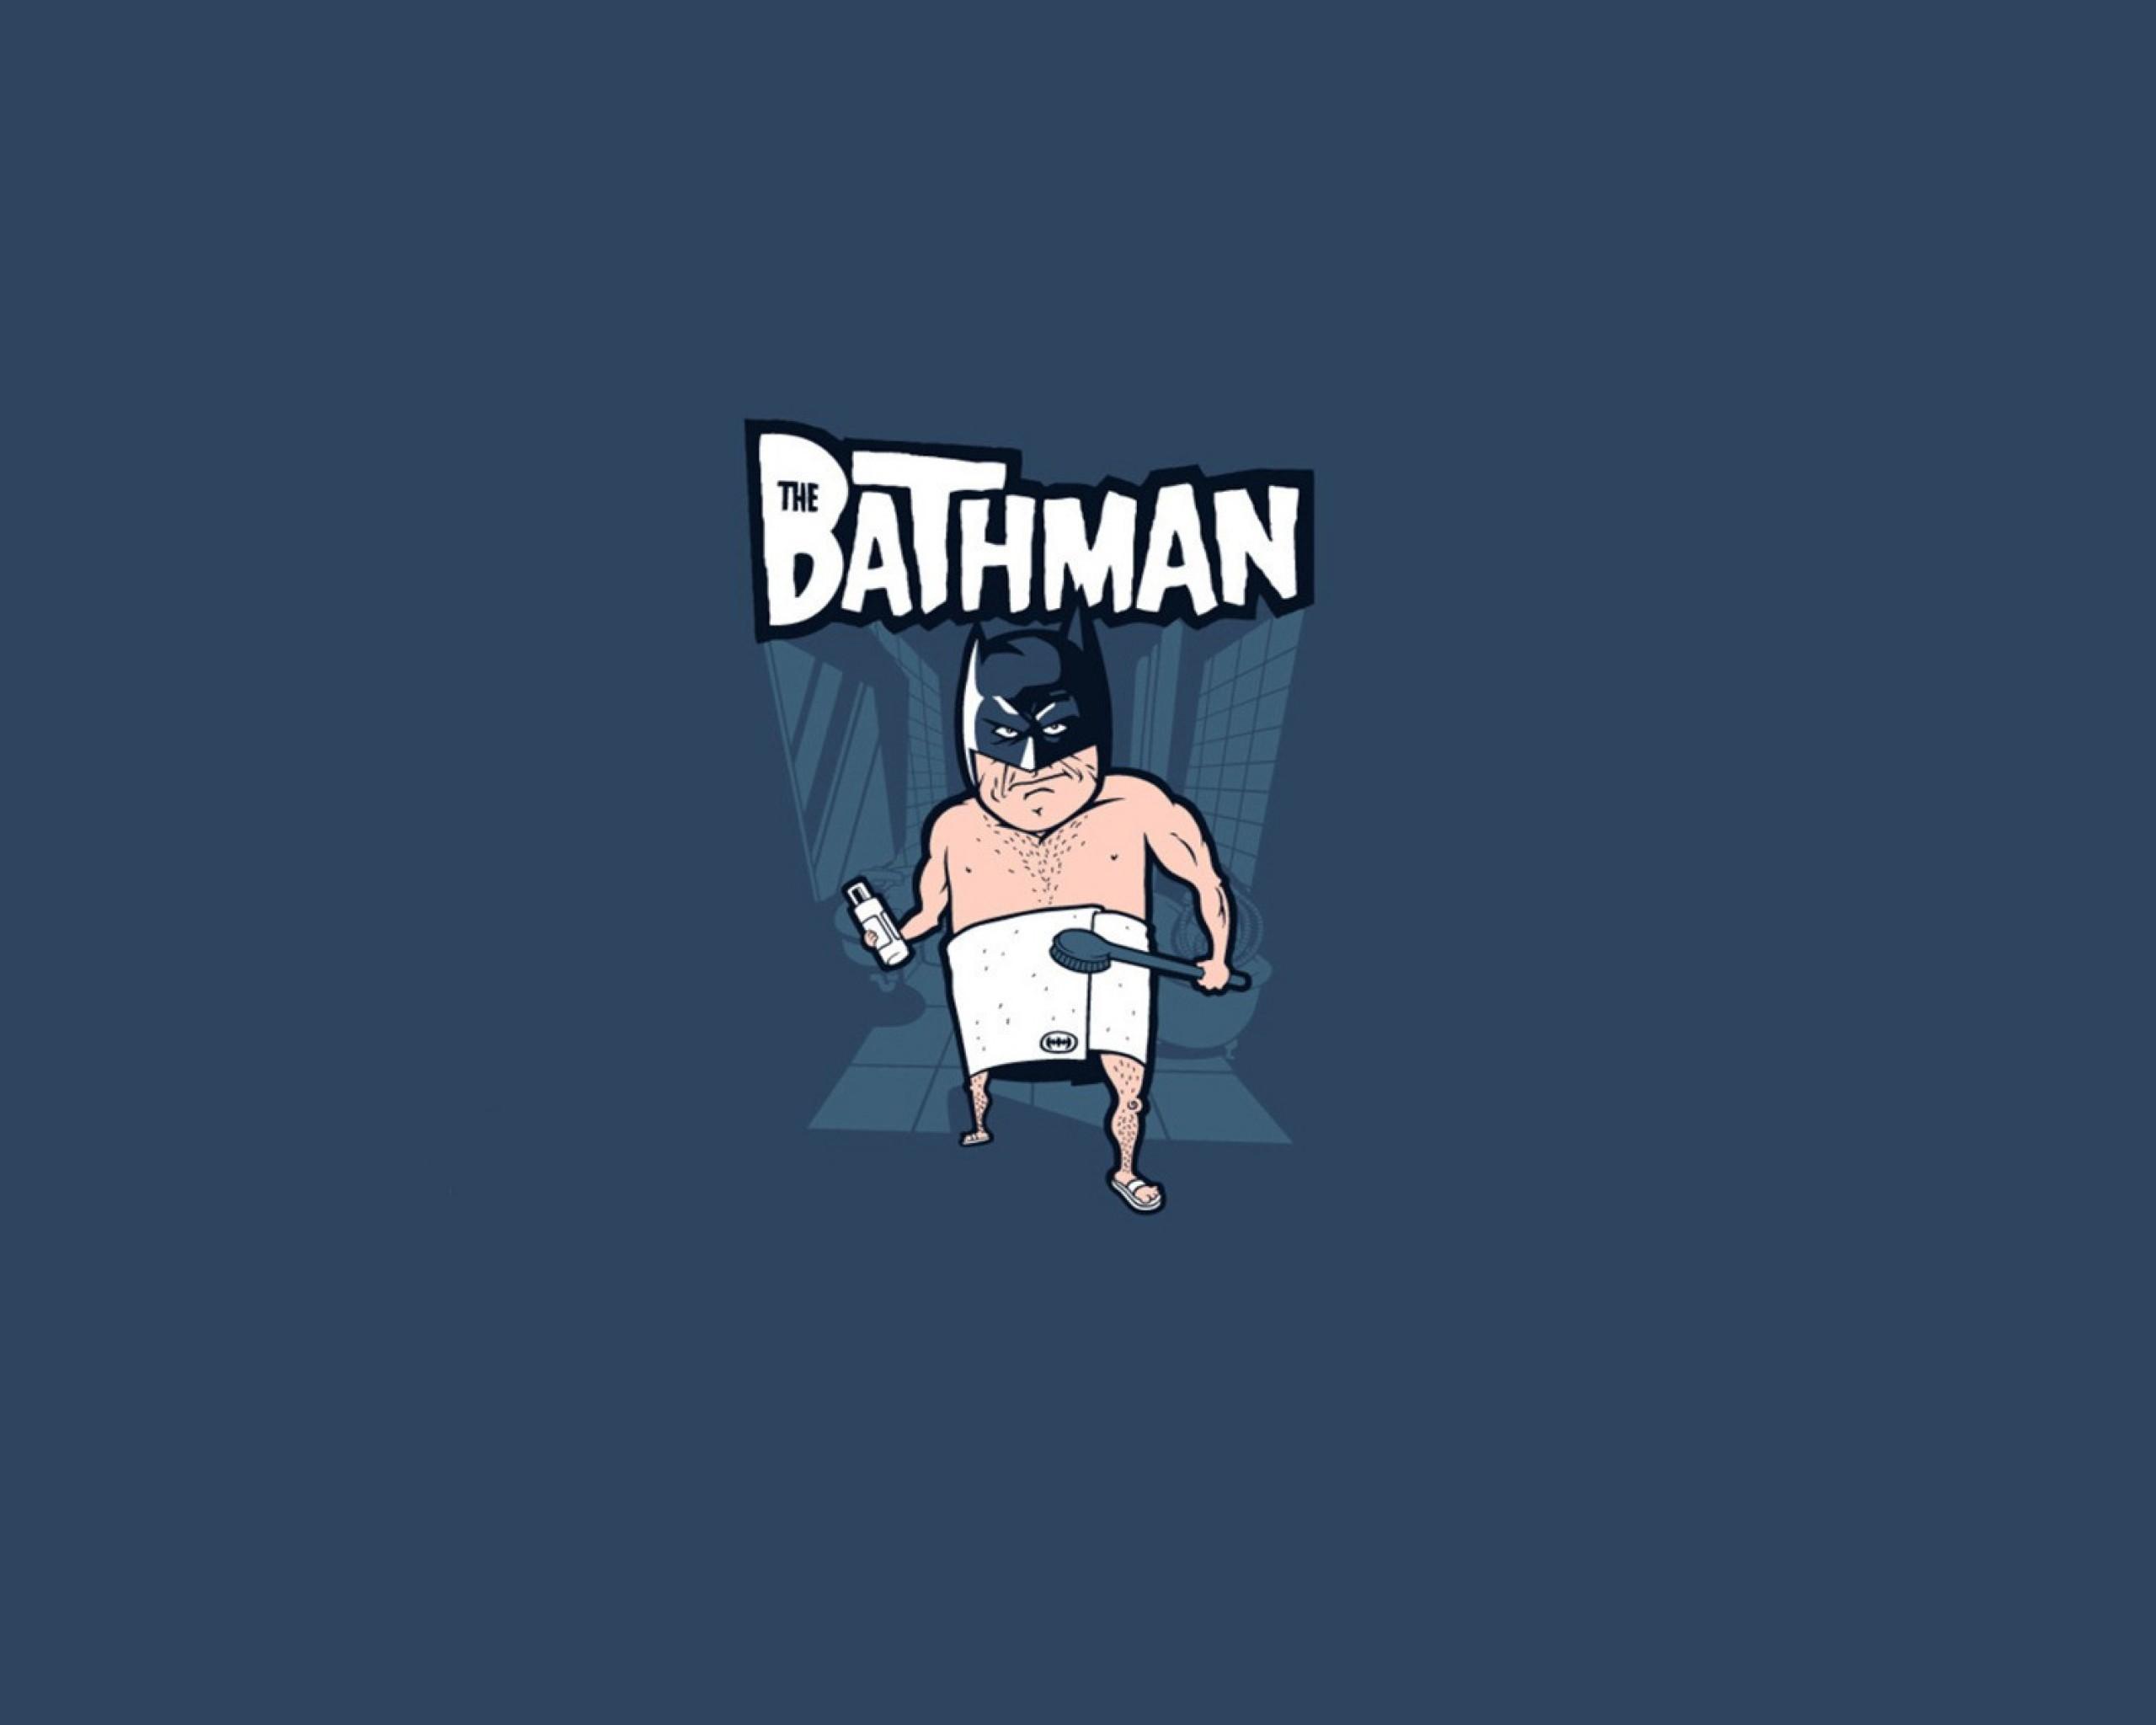 Hilarious Wallpaper For iPhone , Download 4K Wallpaper For Free